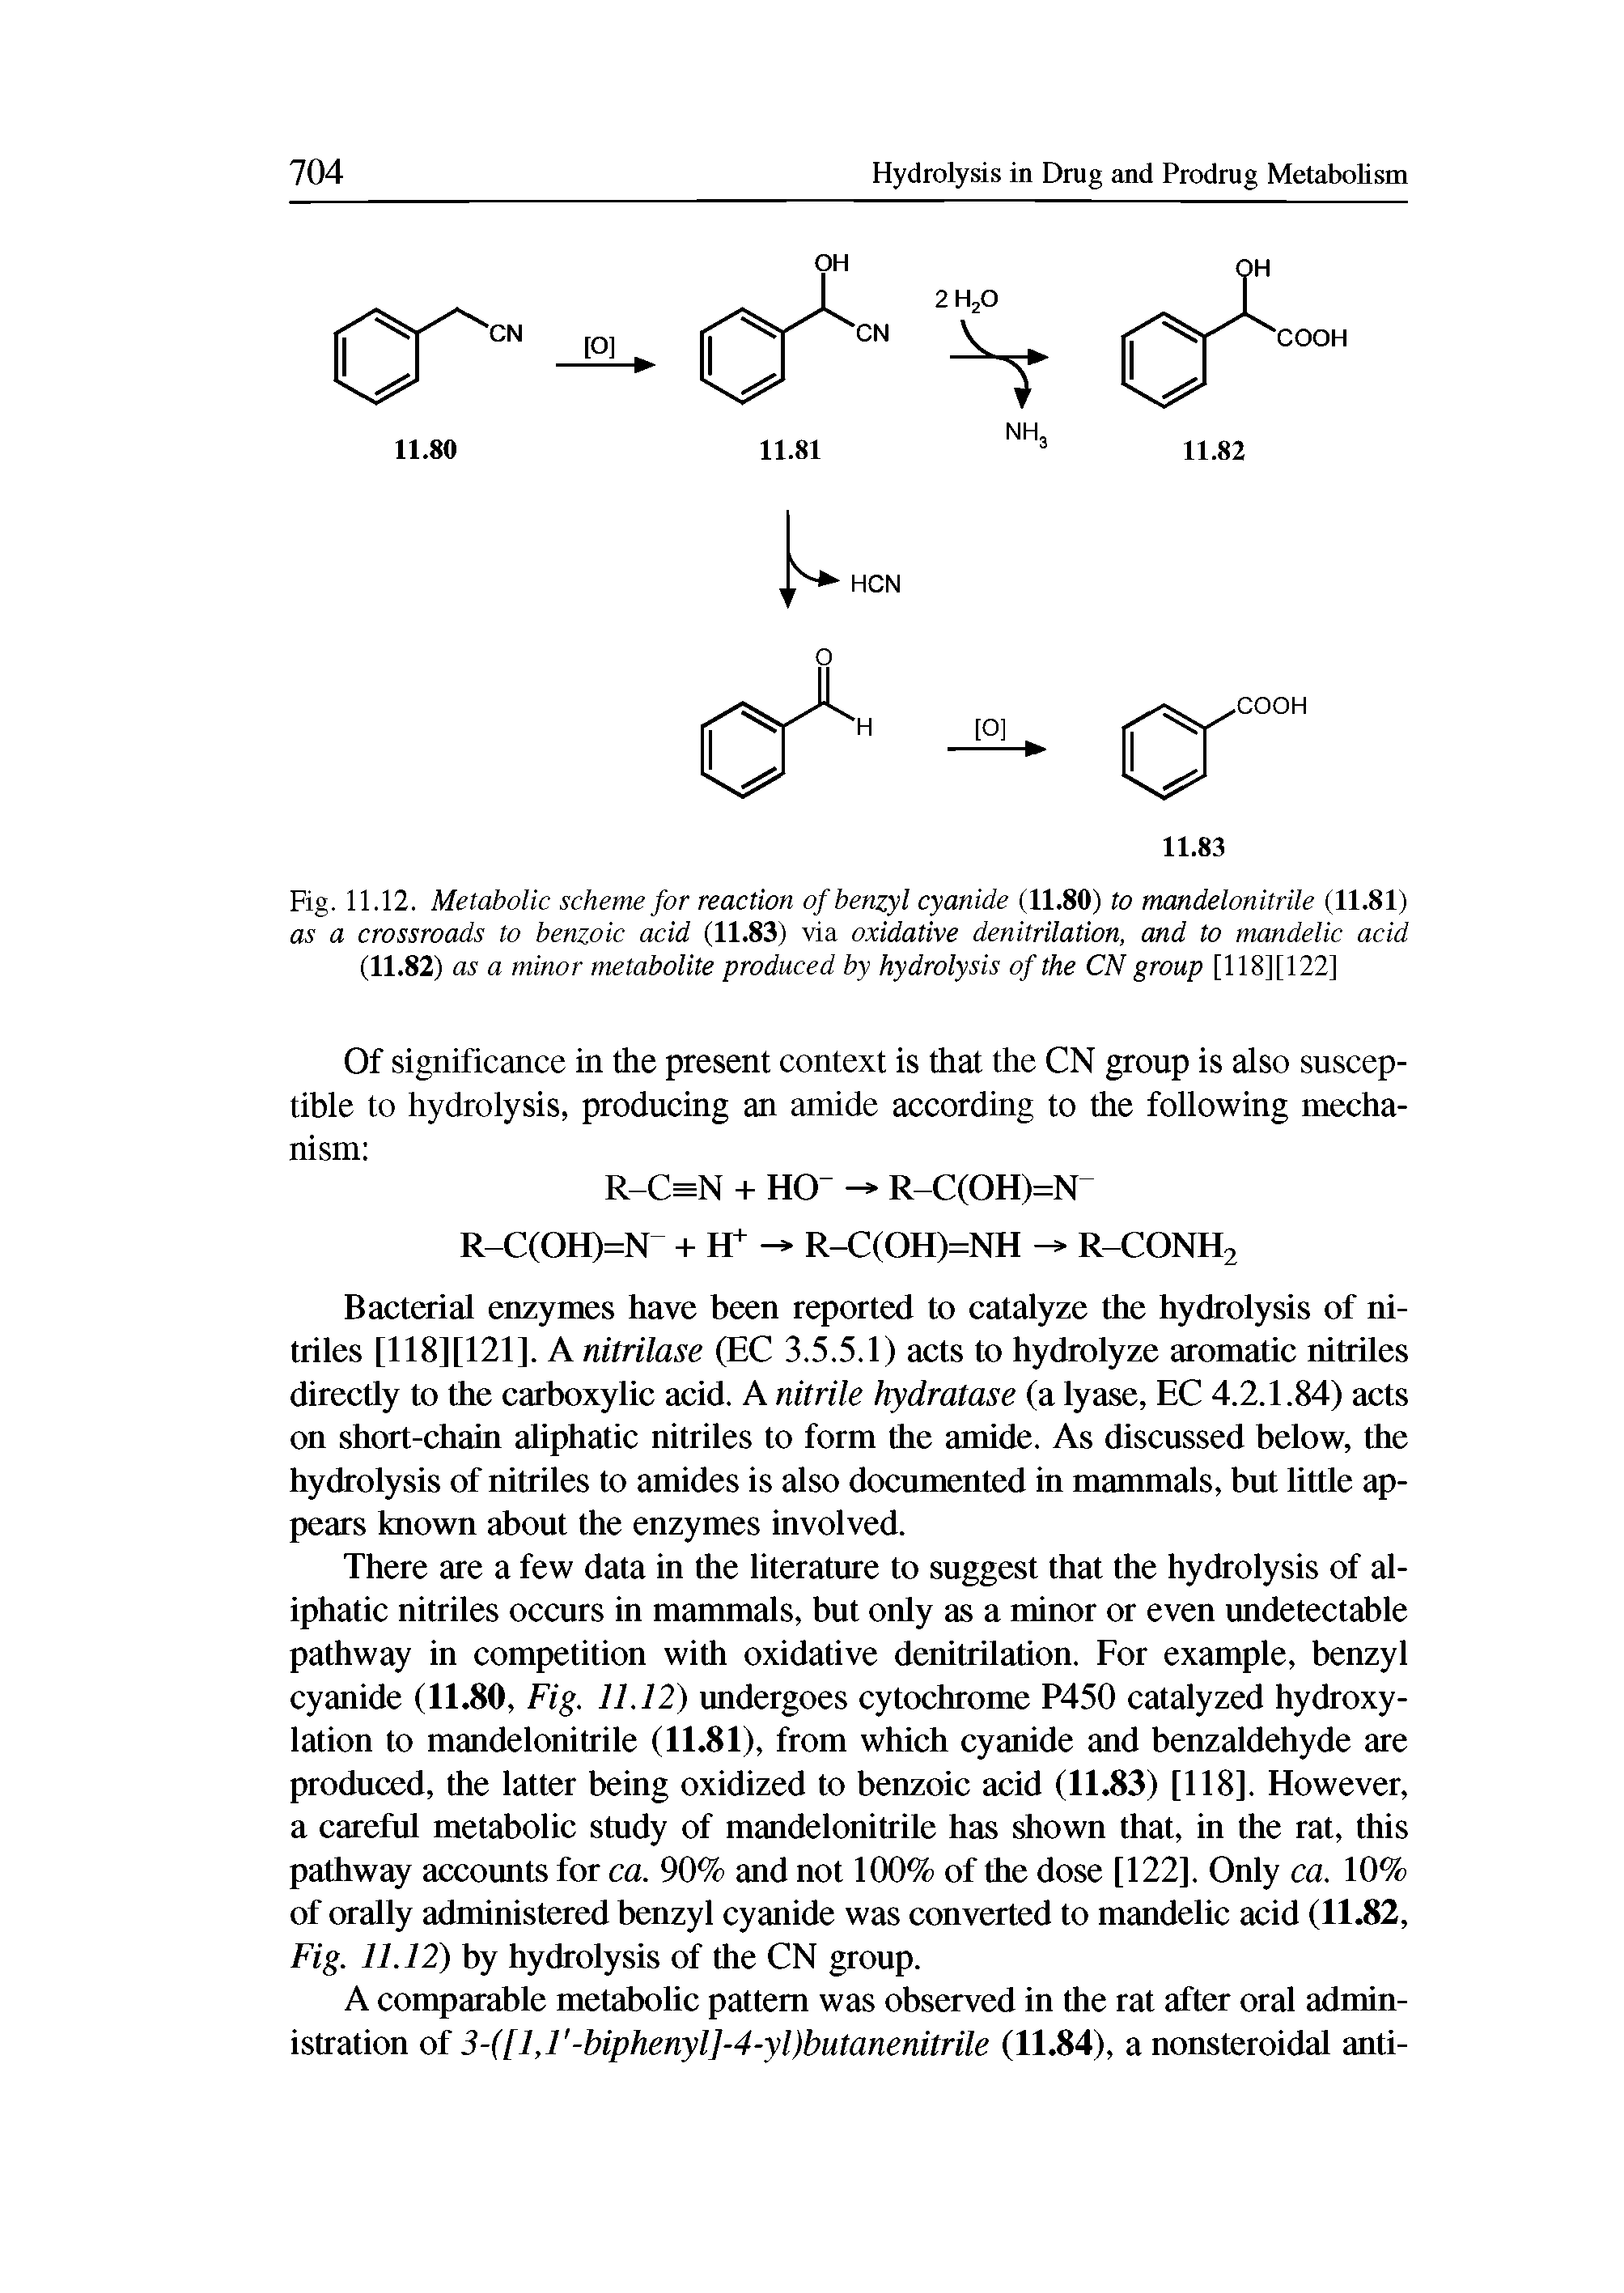 Fig. 11.12. Metabolic scheme for reaction of benzyl cyanide (11.80) to mandelonitrile (11.81) as a crossroads to benzoic acid (11.83) via oxidative denitrilation, and to mandelic acid (11.82) as a minor metabolite produced by hydrolysis of the CN group [118][122]...